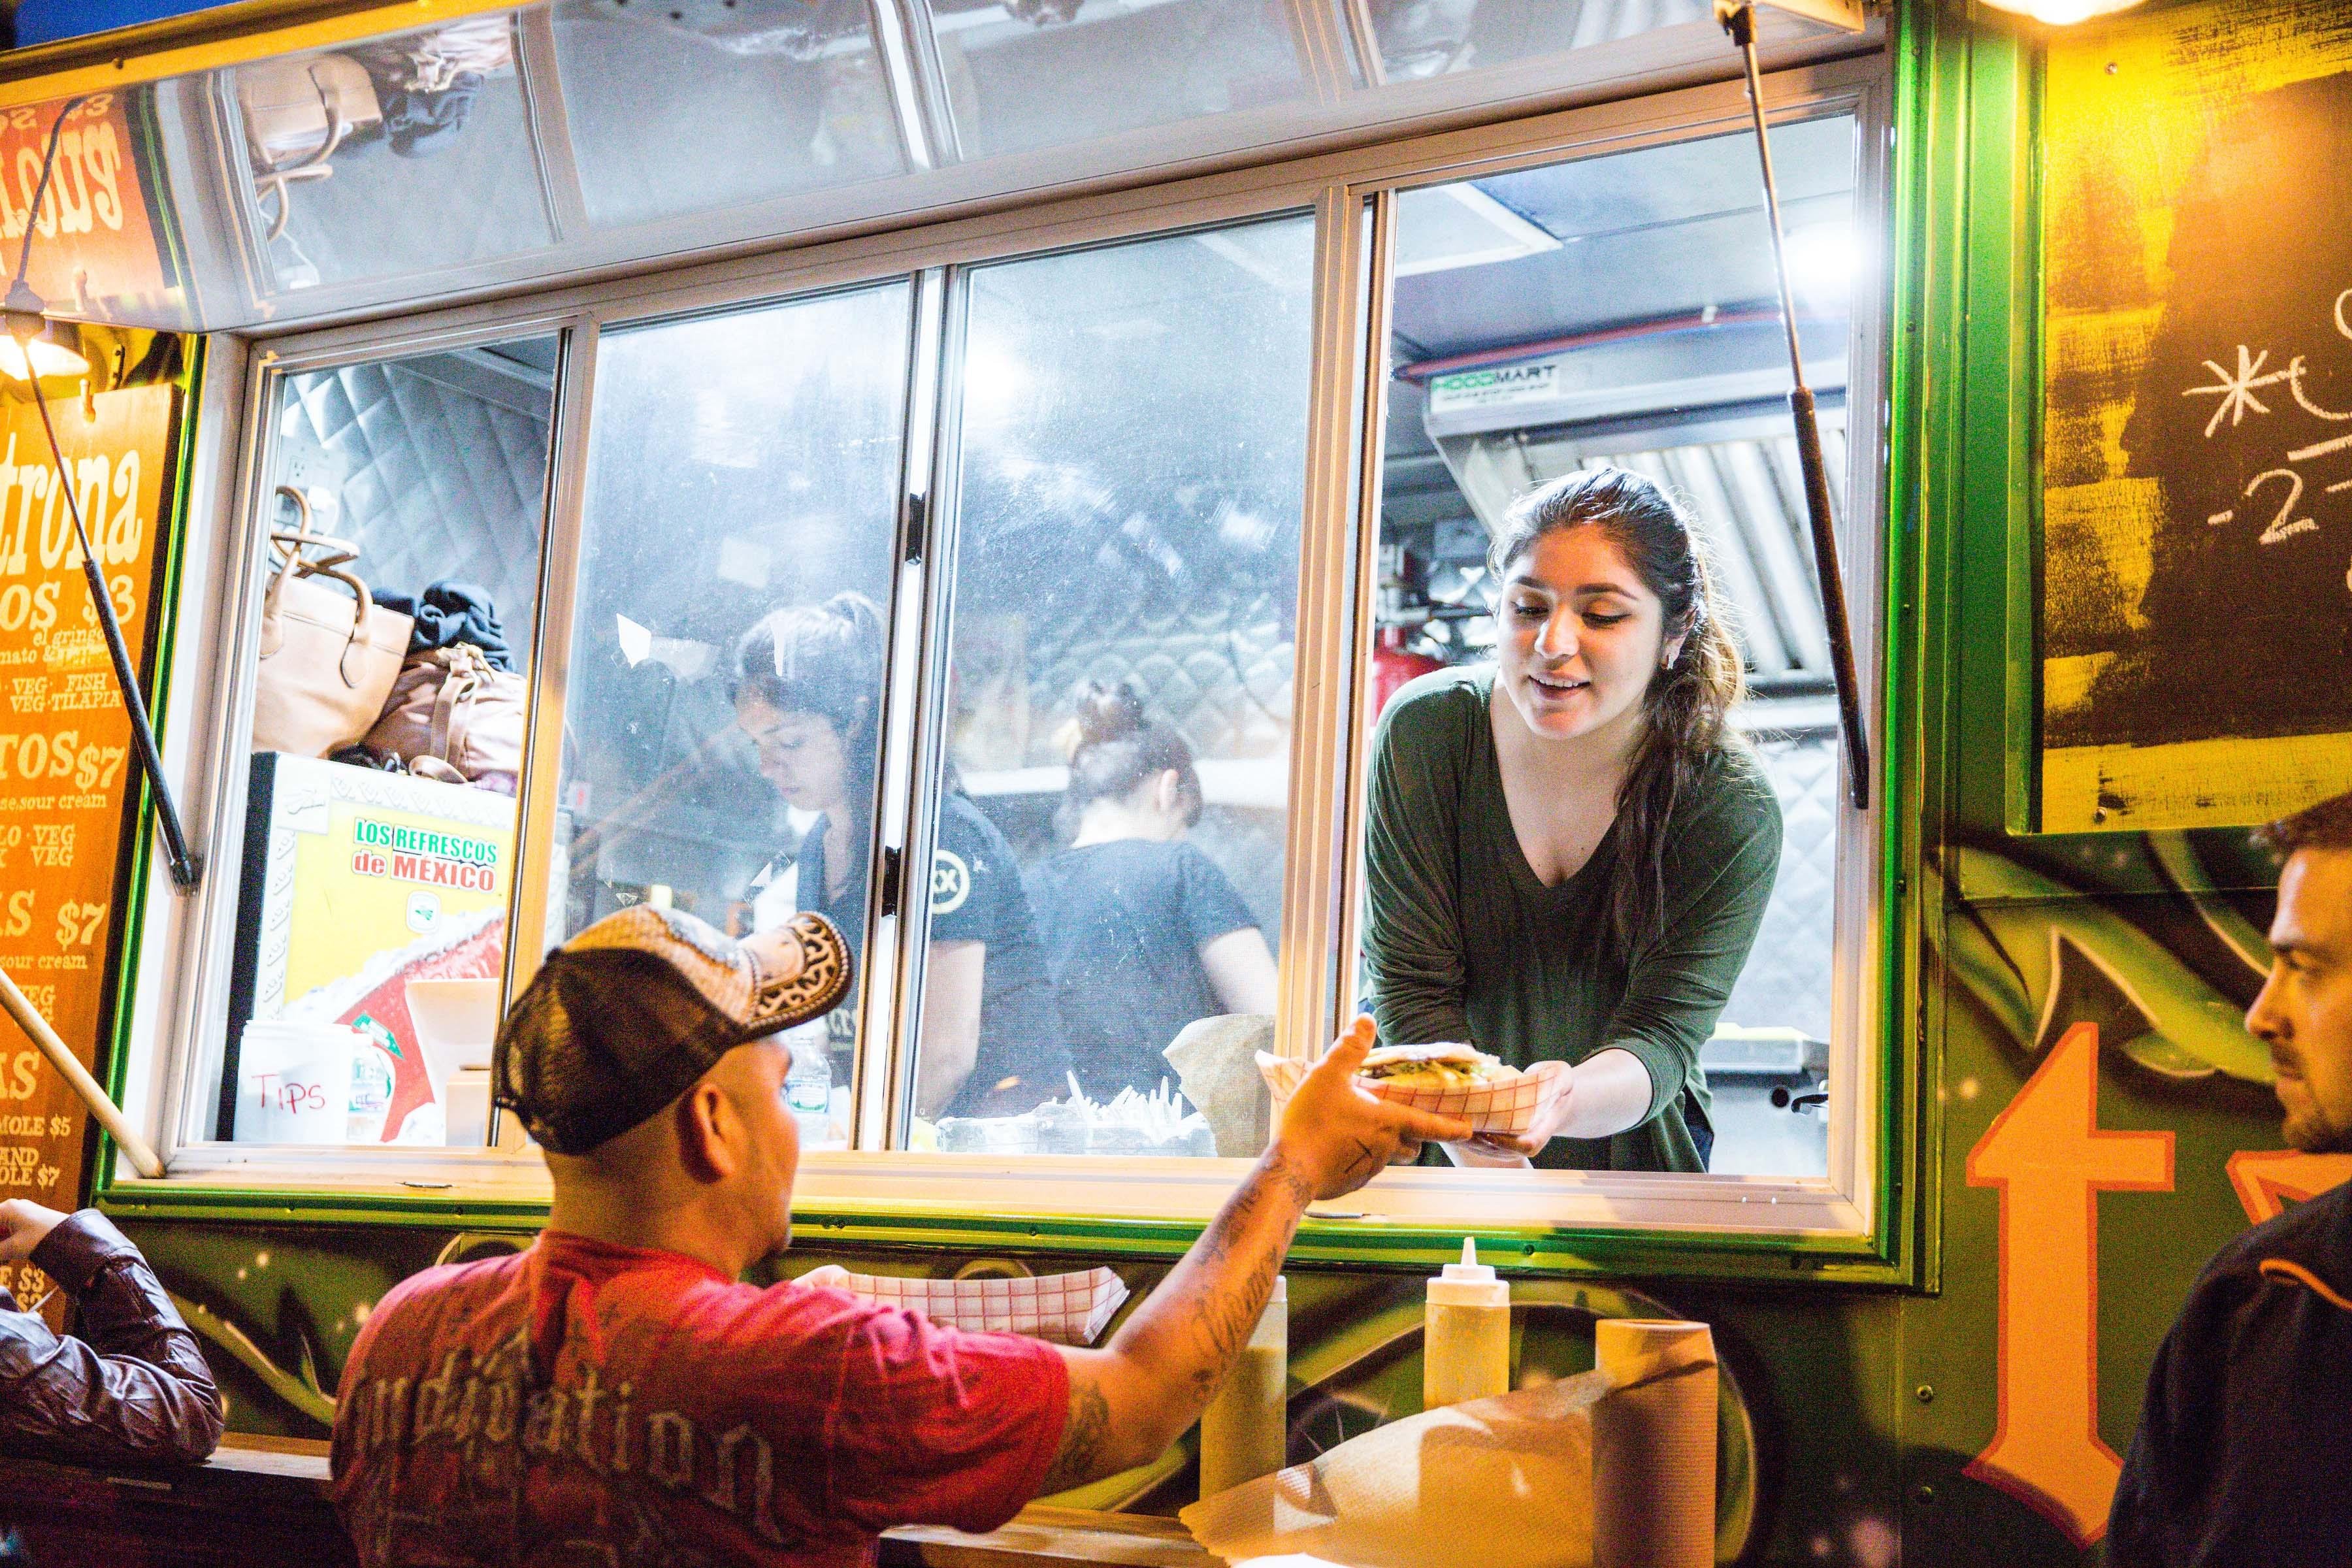 Stock up on snacks at the West Town Food Truck Social.